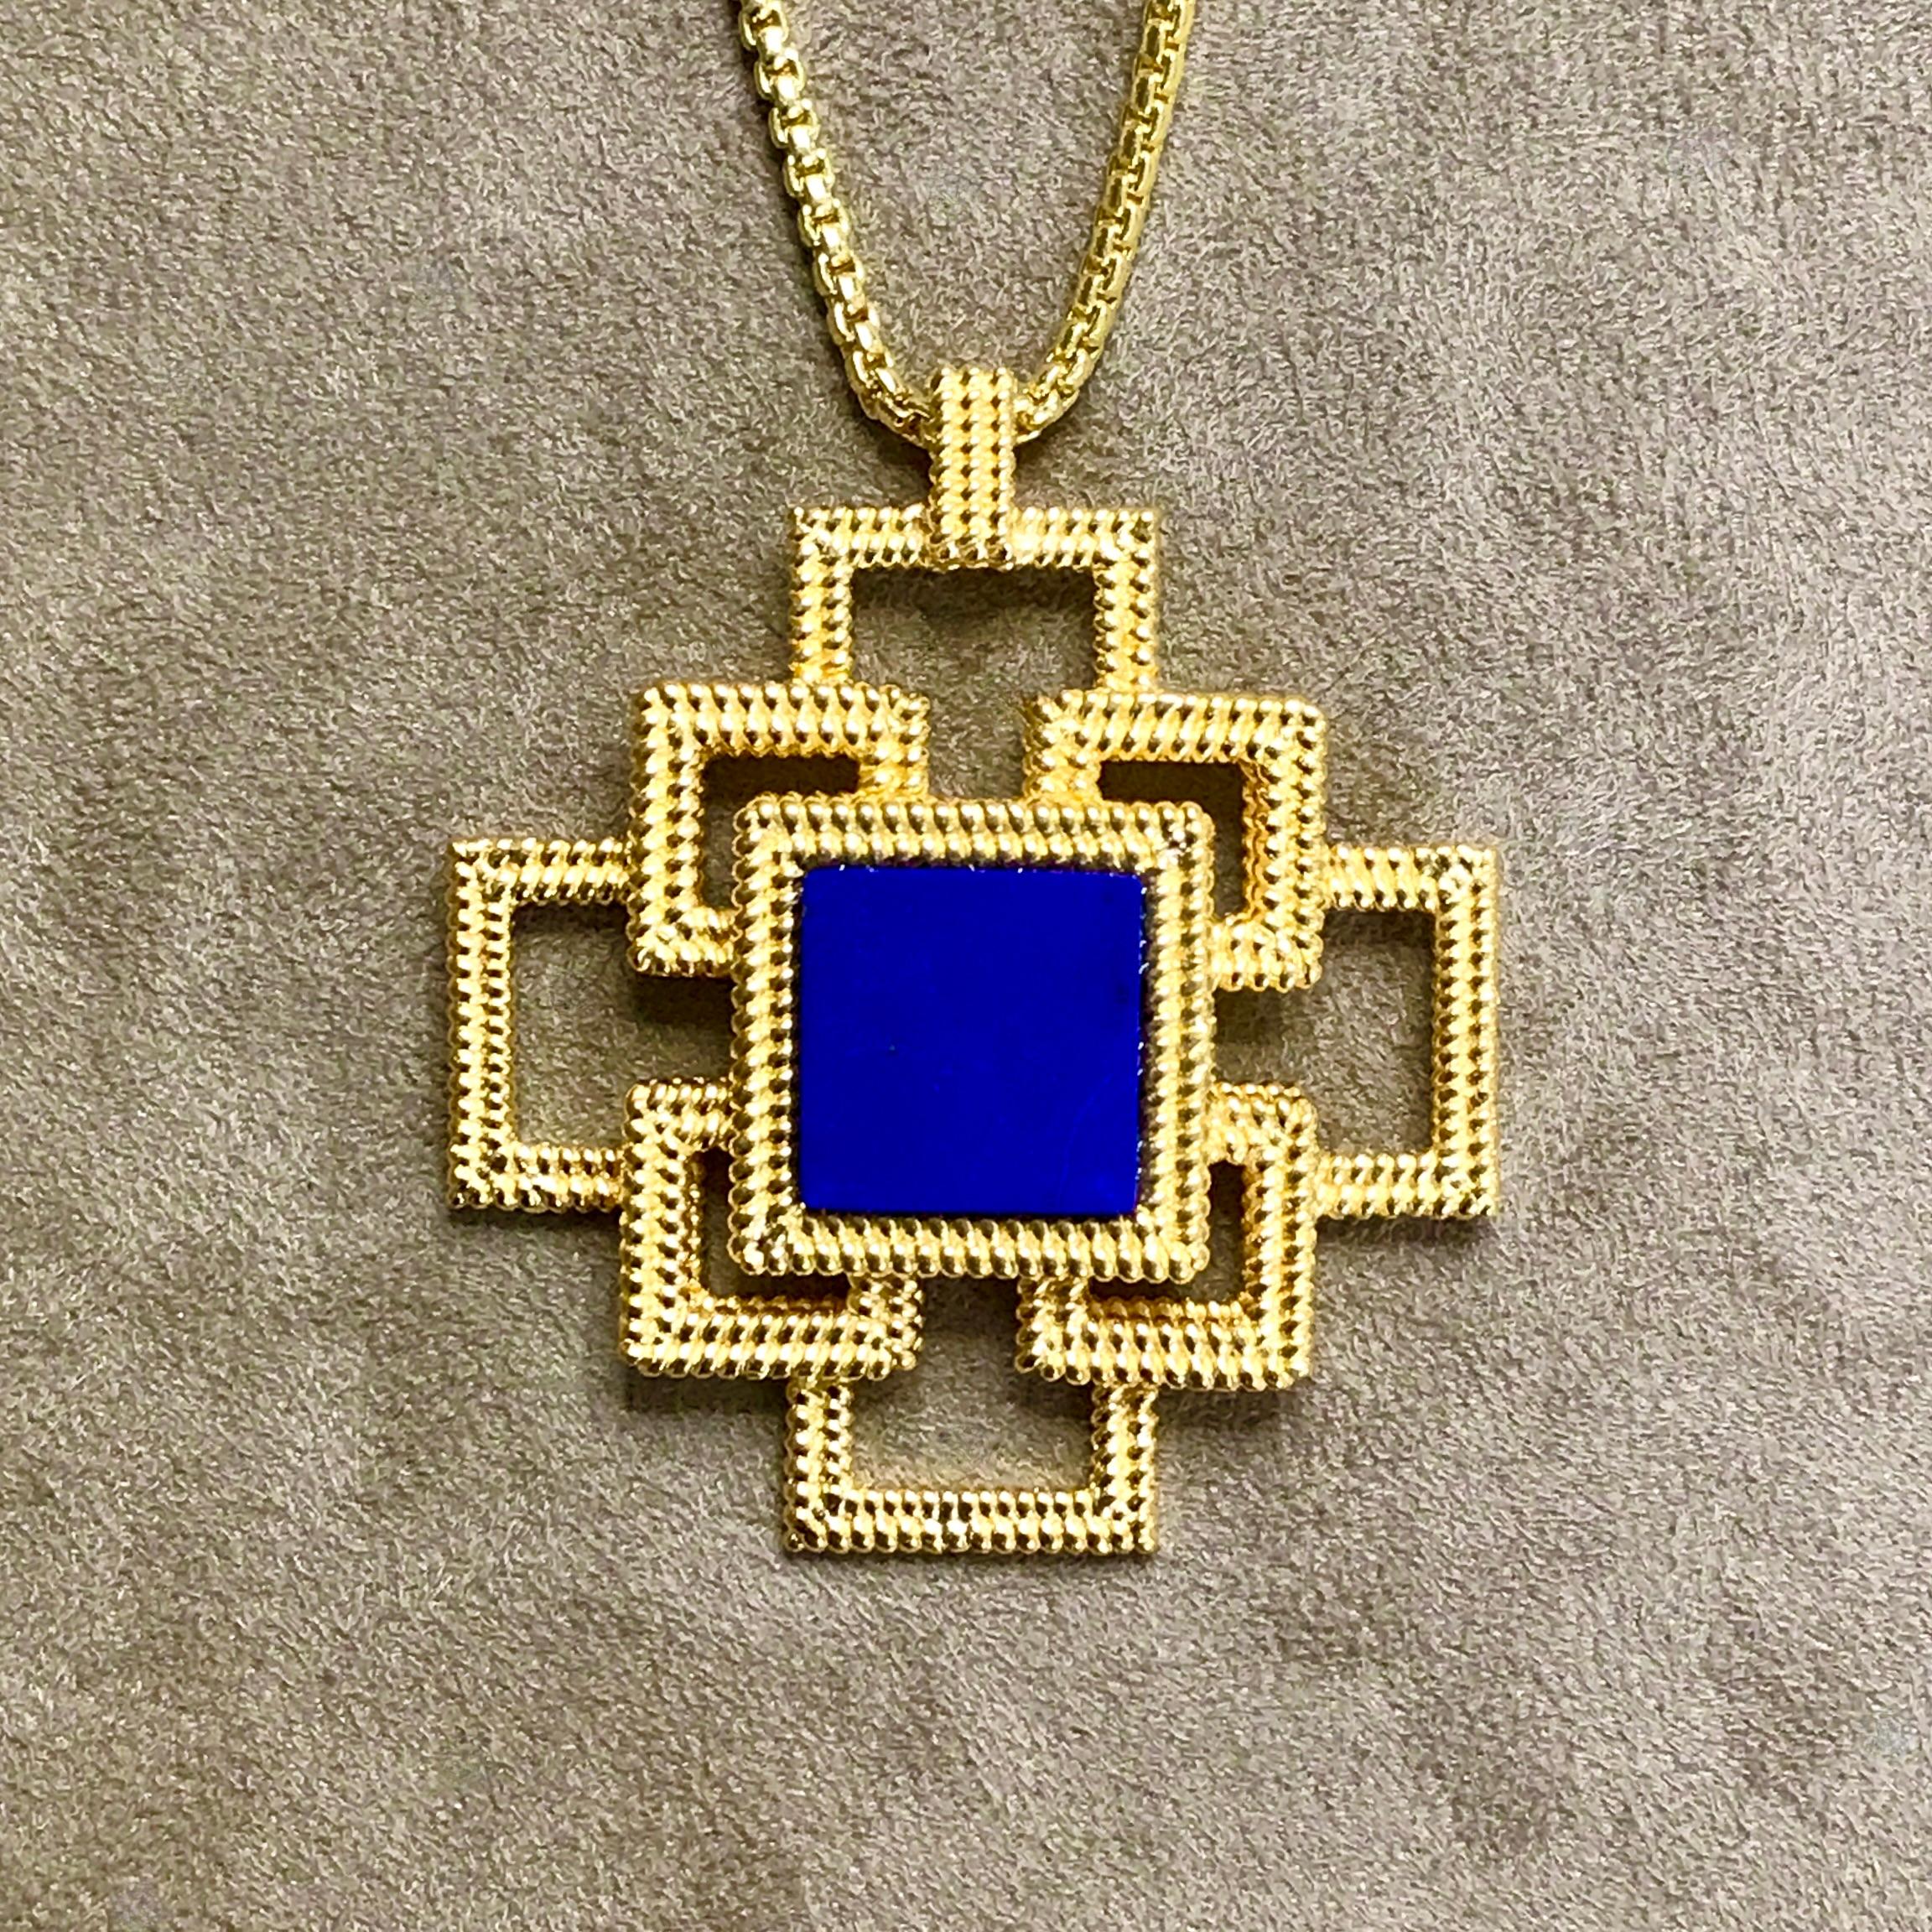 Formed of 9 interlocking 'ropetwist' stepped squares, set at centre with a square Lapis Lazuli 'tile' of beautiful colour,  this is a wonderfully simple yet stylish pendant, perfect for day or night.

We sell this pendant with a long box link chain,